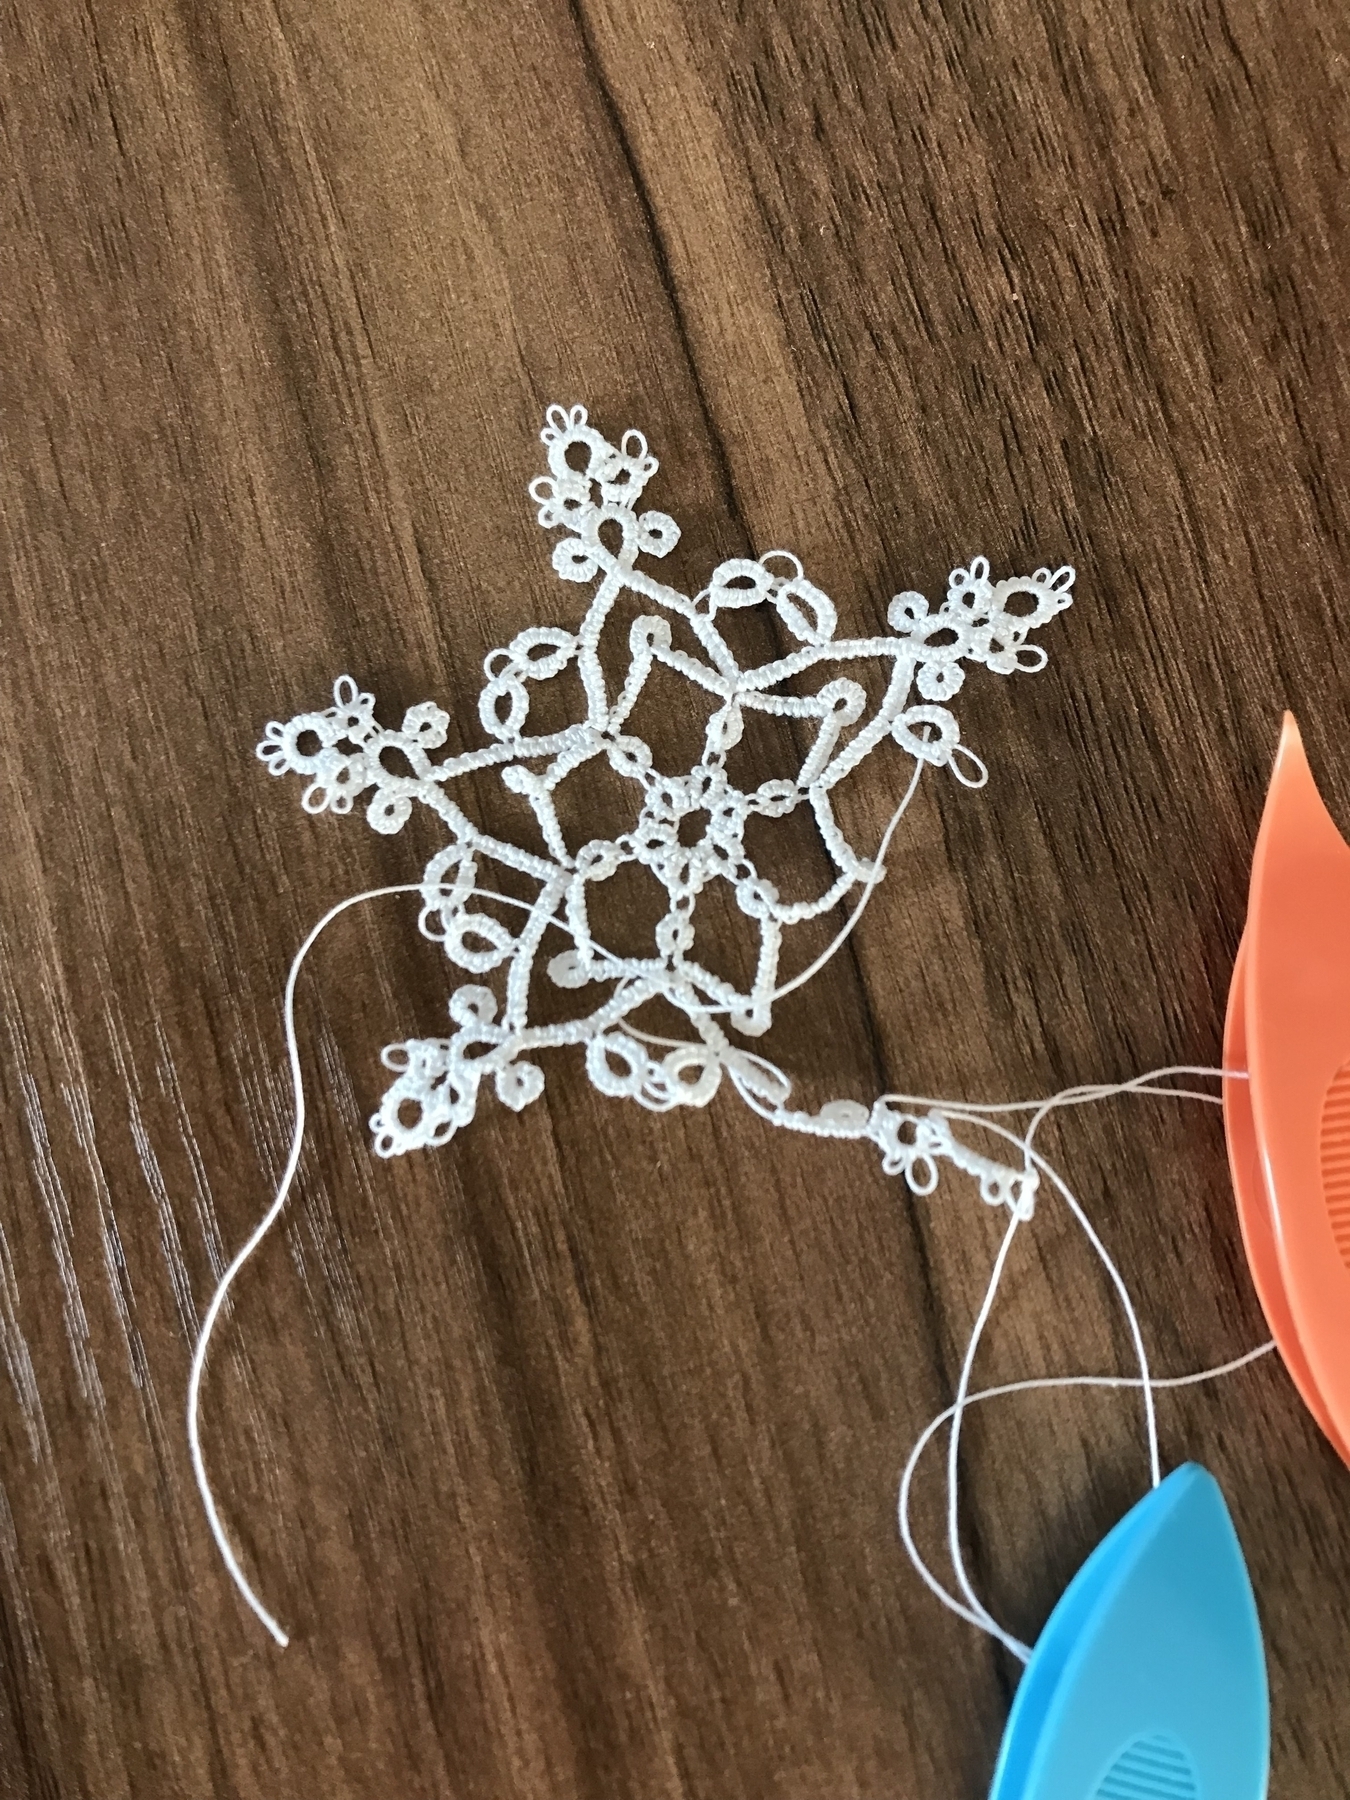 half-finished tatted white snowflake on a desk, with the shuttles still attached”></p>

  </article>

</div>




      </div>
    </div>

    <footer class=